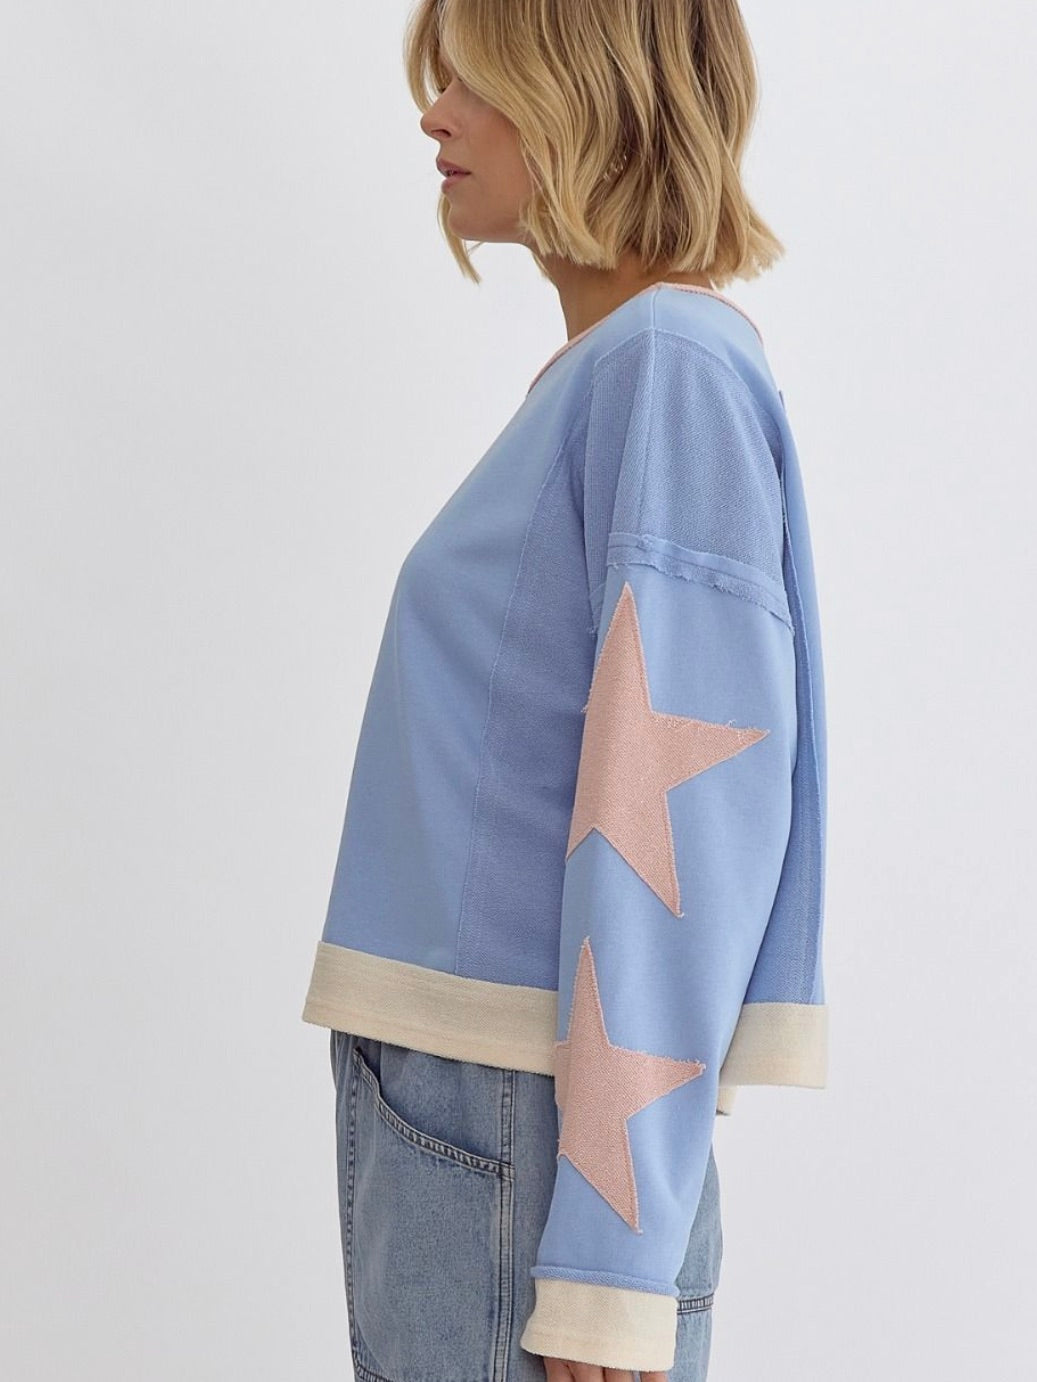 Lucy Stars Cropped Sweater